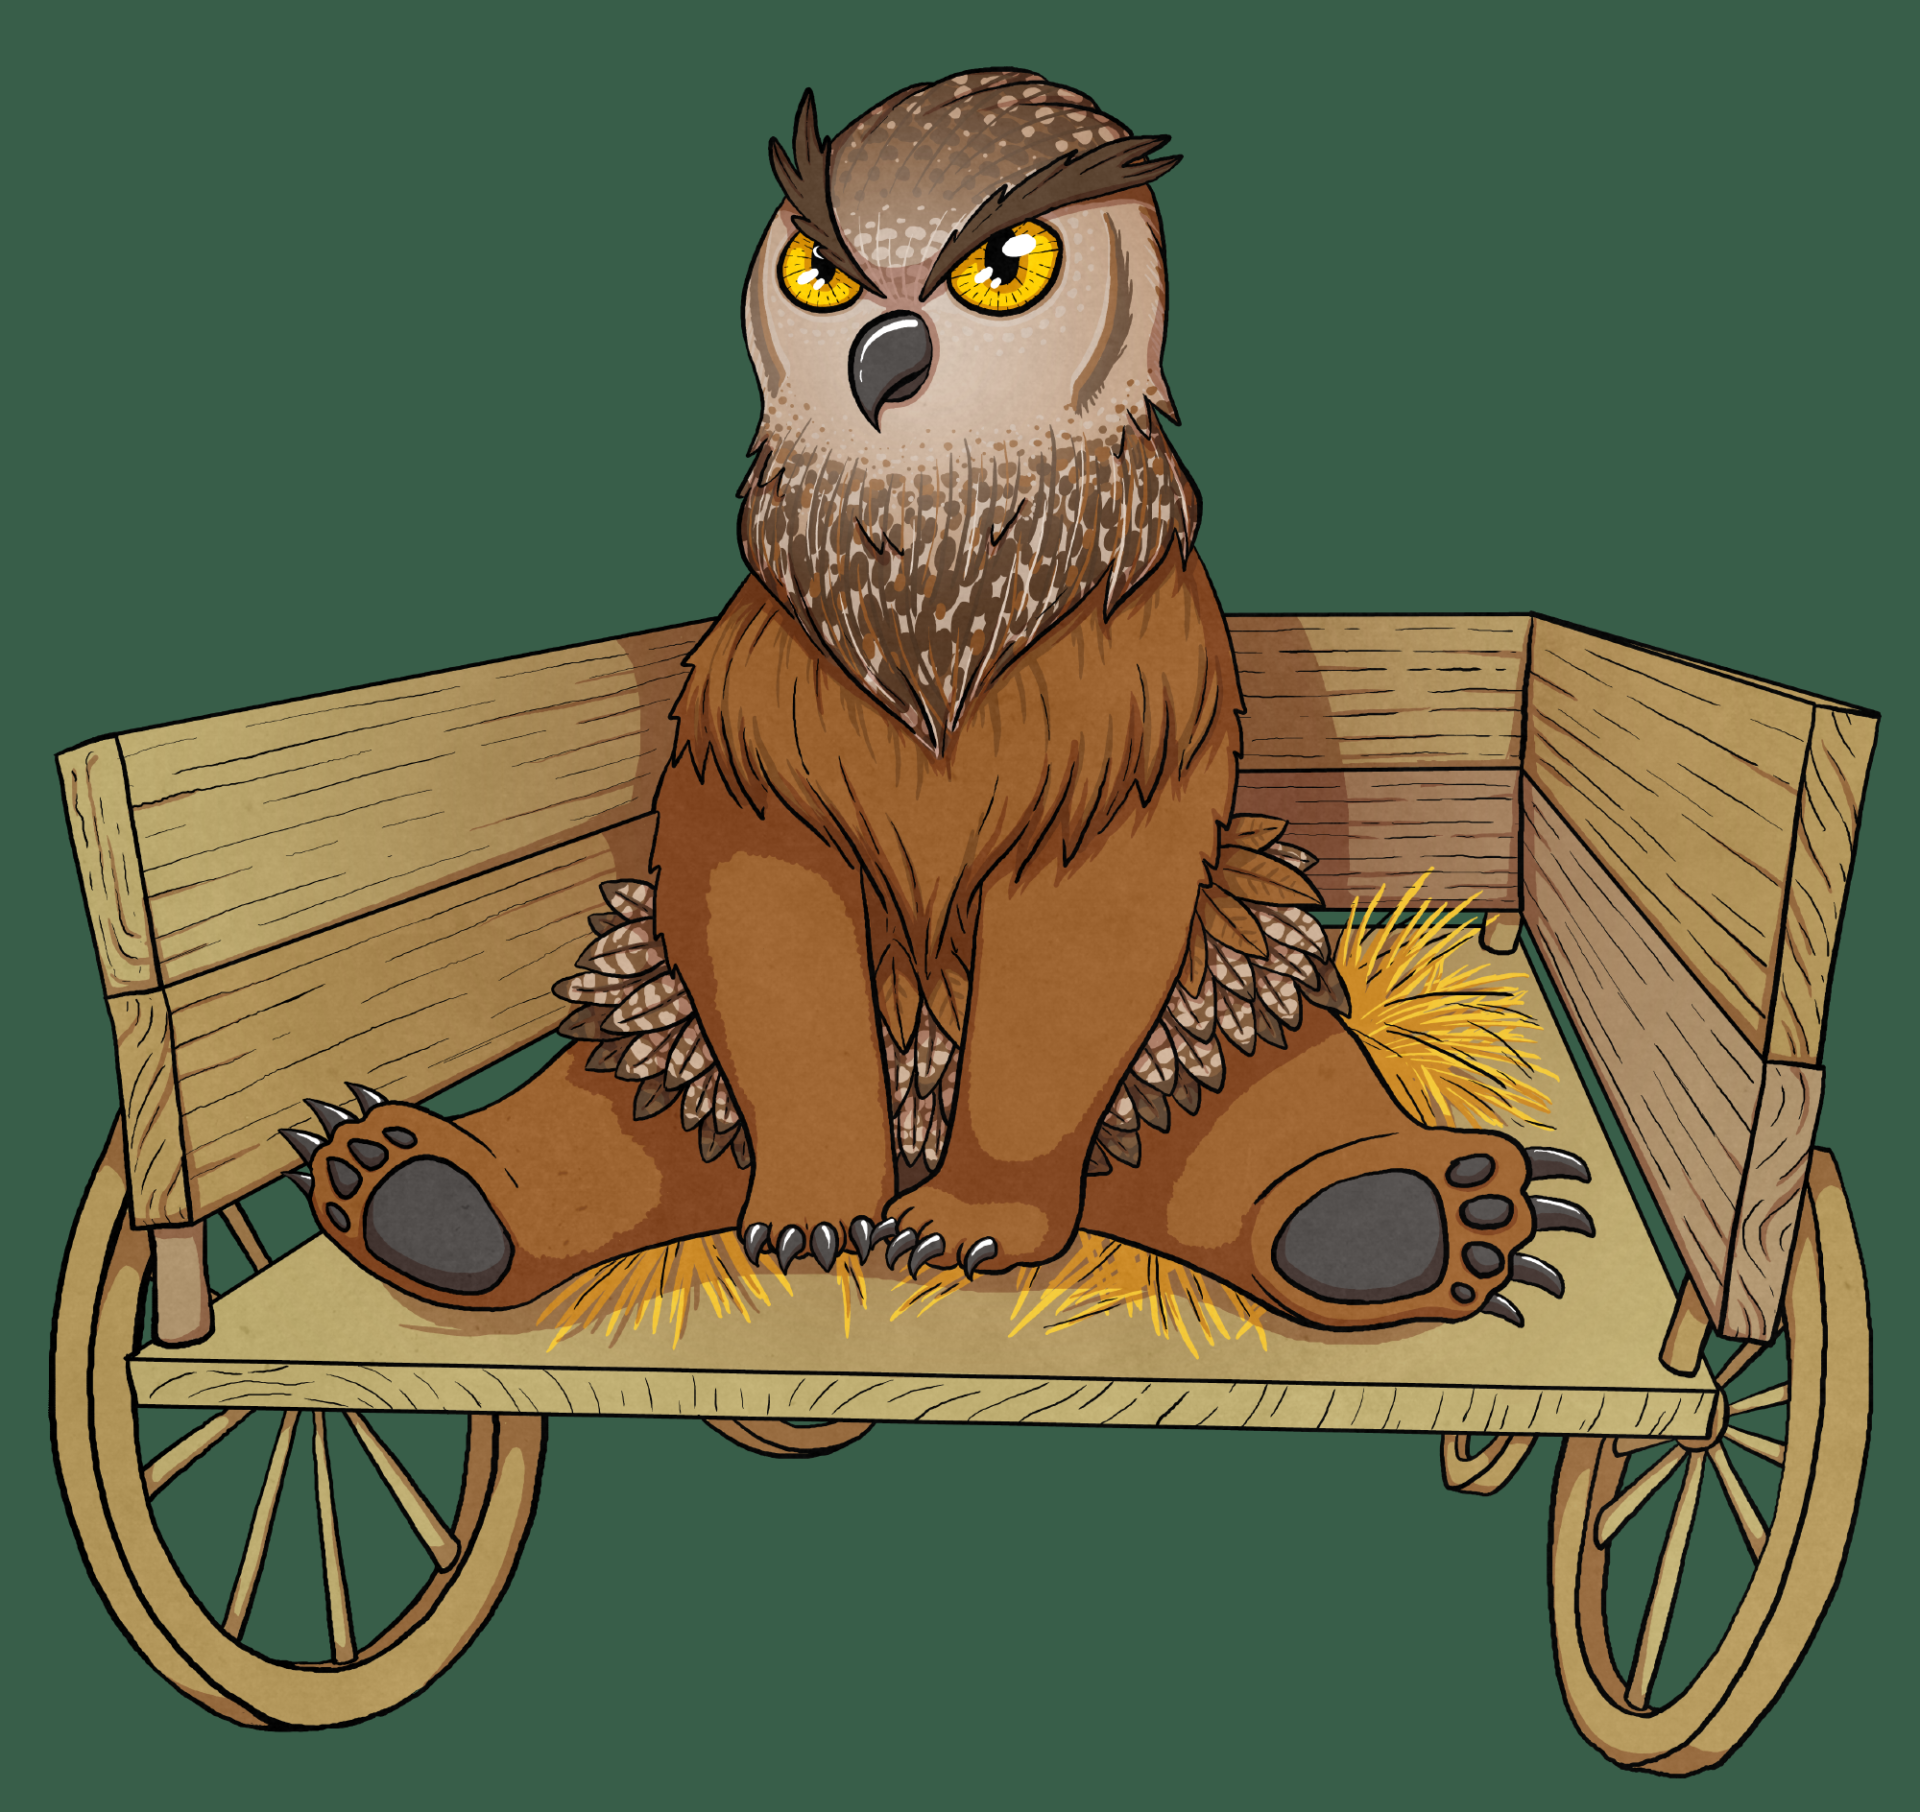 illustration of an owlbear sitting in the back of a wooden cart